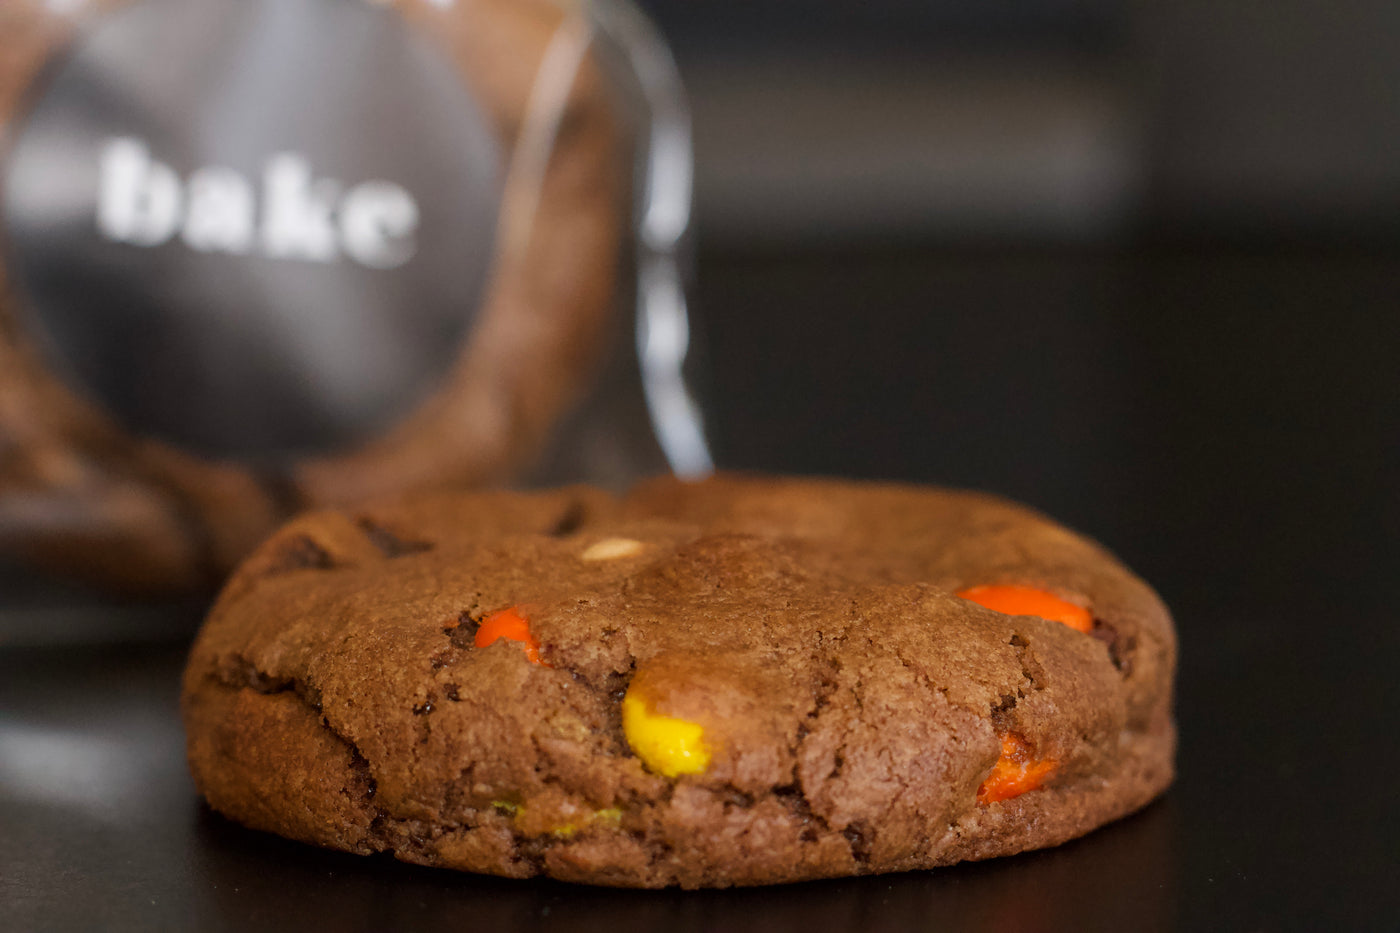 Chocolate Peanut Butter Chip COokie with Reeses Pieces from bake the Cookie Shoppe in Las Vegas